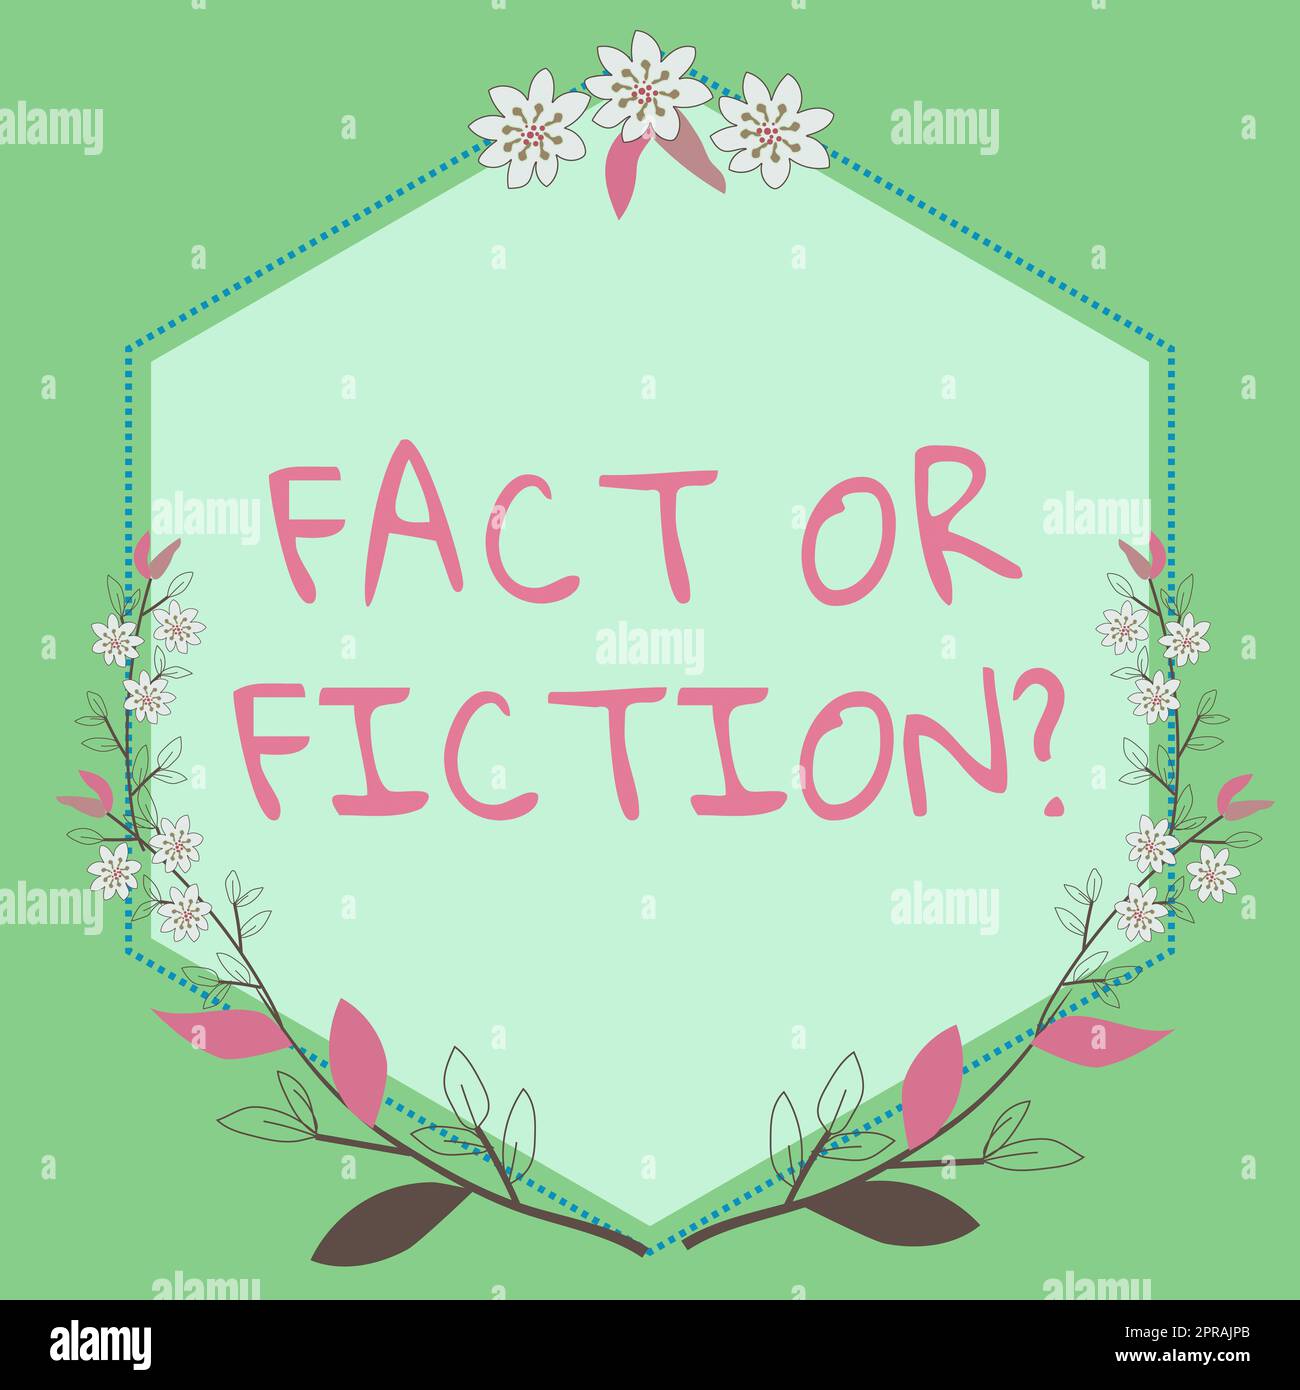 Text sign showing Fact Or Fiction. Business idea Is it true or is false doubt if something is real authentic Frame With Leaves And Flowers Around And Important Announcements Inside. Stock Photo